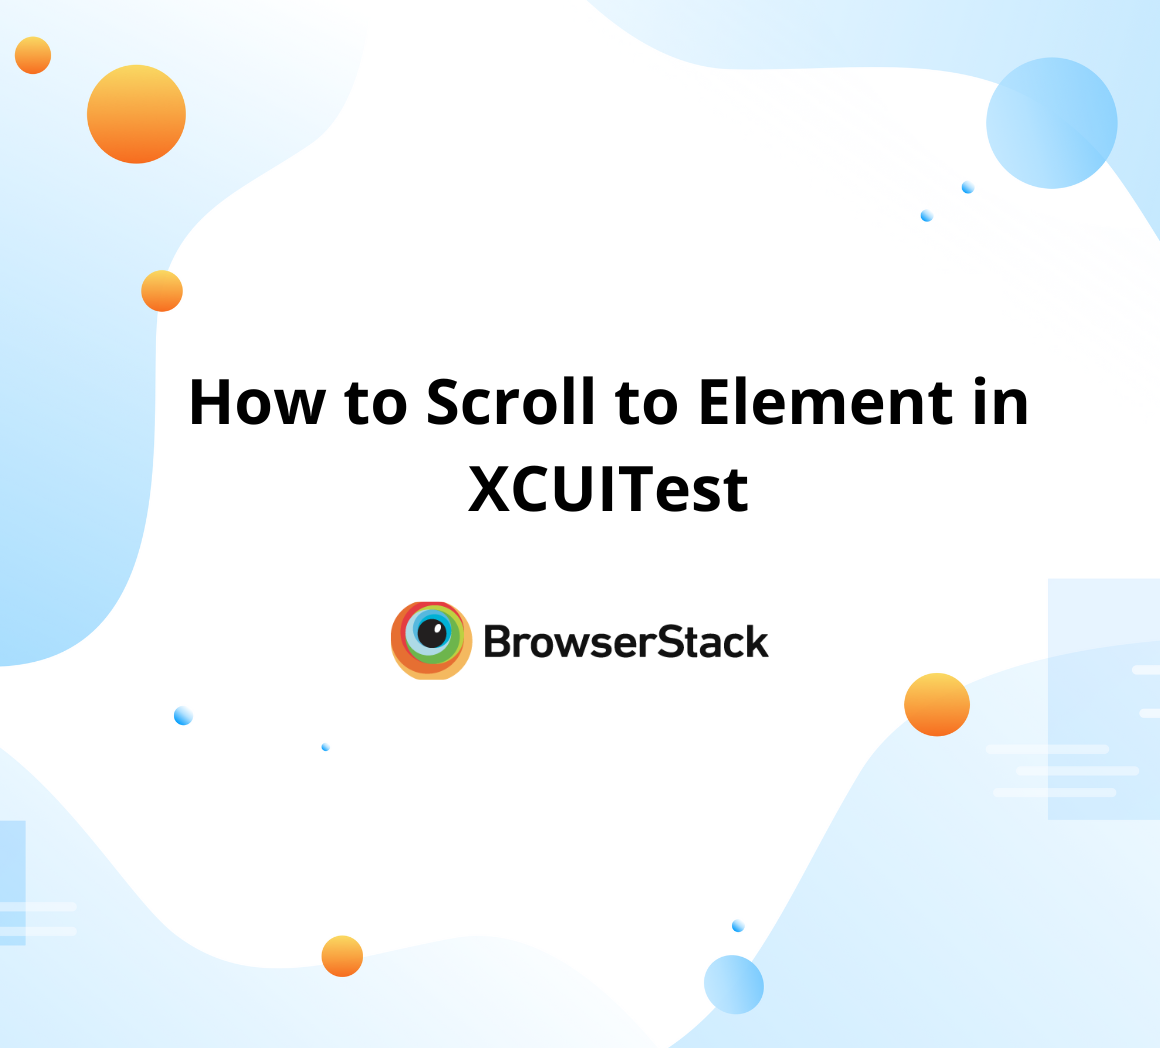 How to Scroll to Element in XCUITest